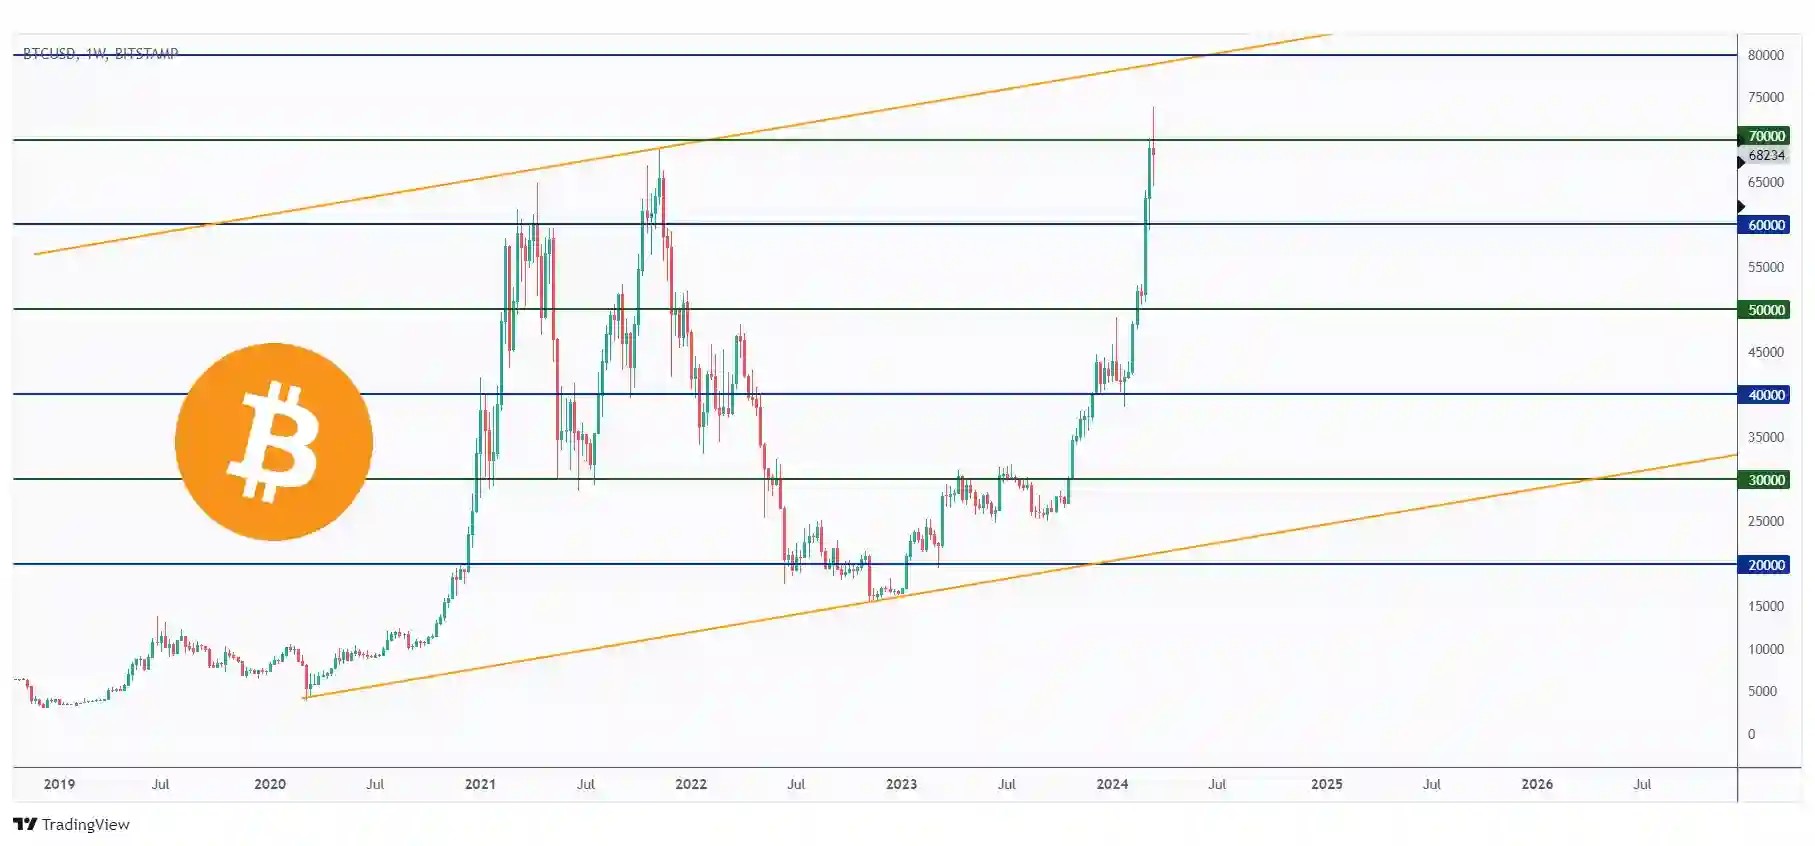 BTC weekly chart hovering around the $70,000.